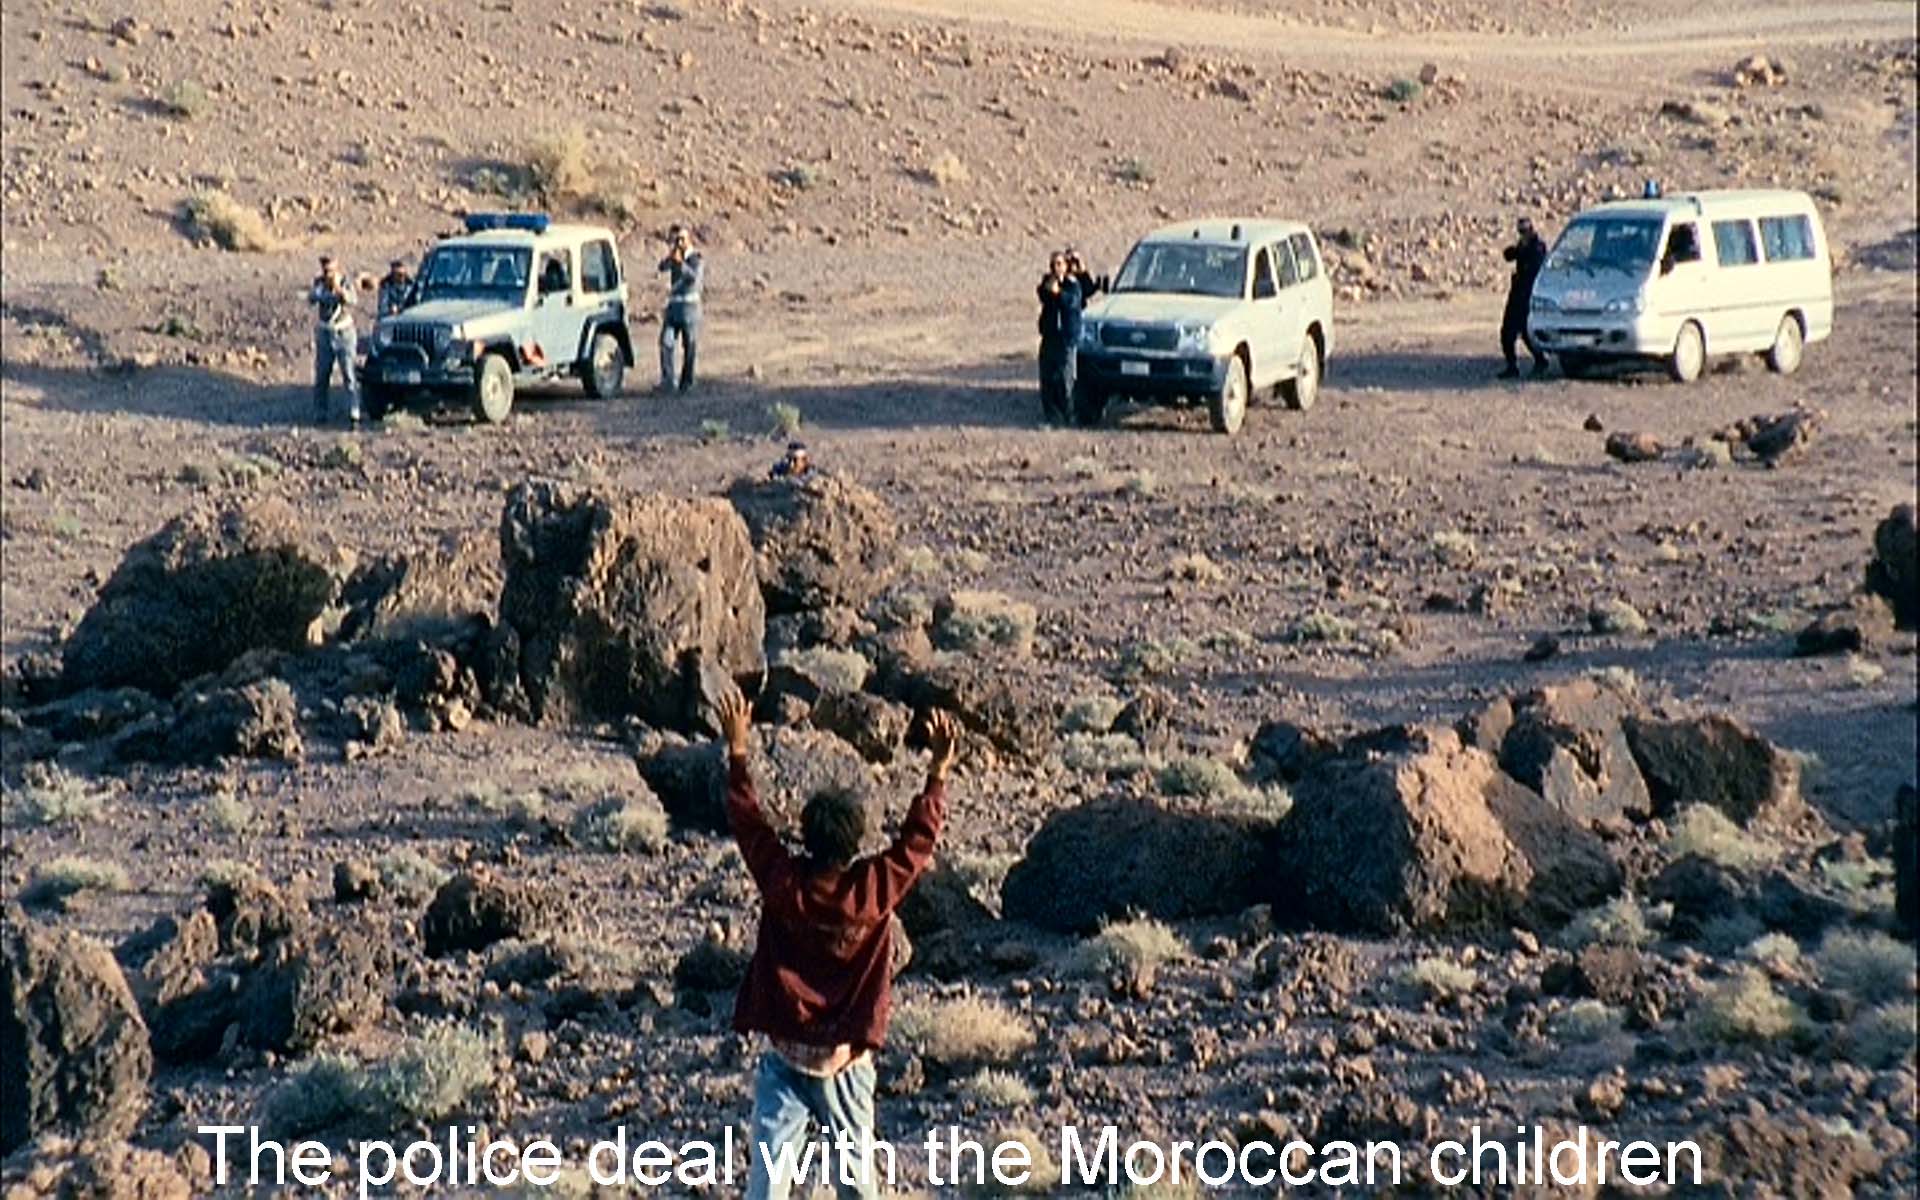 The police deal with the Moroccan children